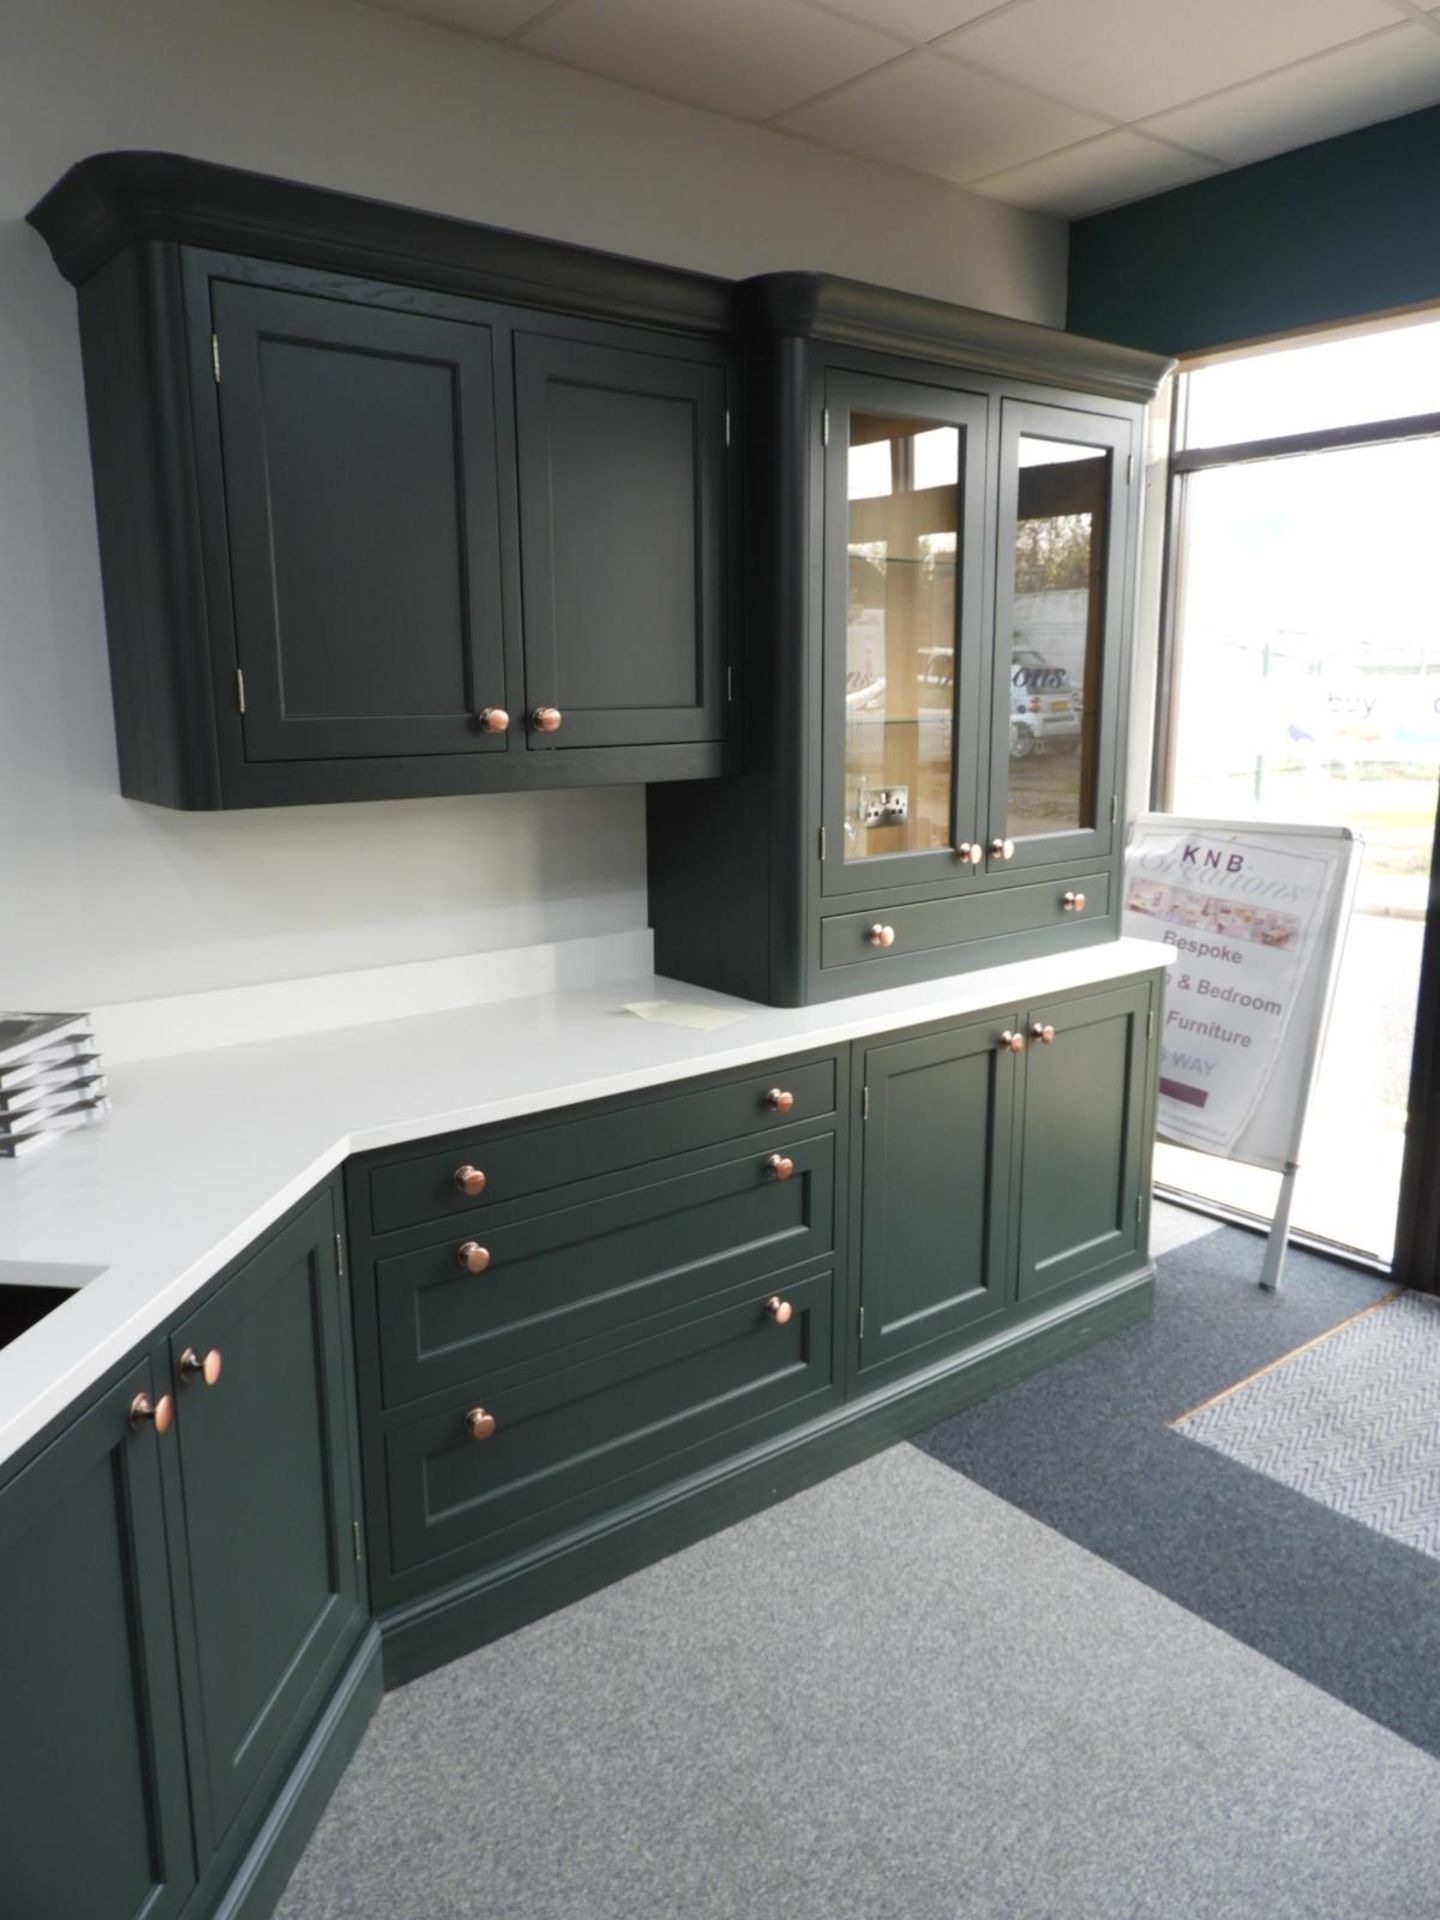 *Belgravia Forest Green Display Kitchen - Image 2 of 4